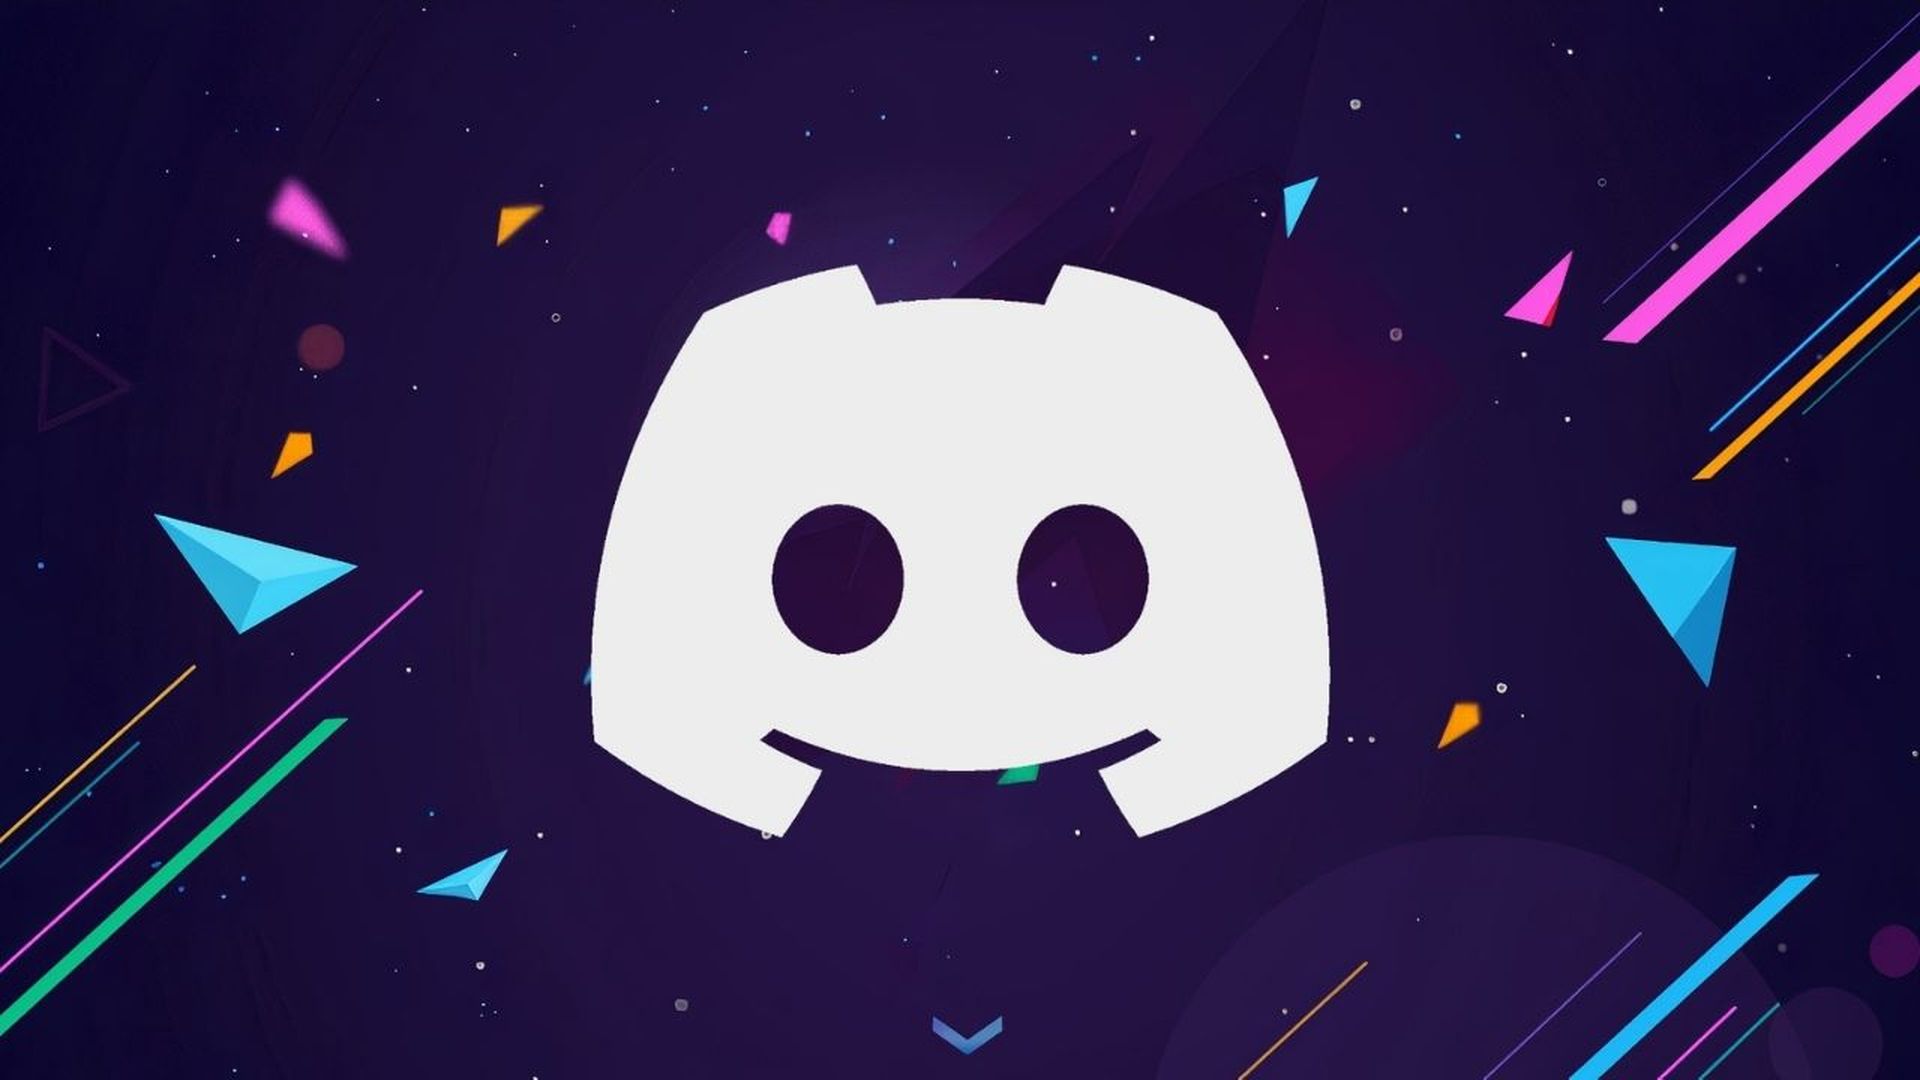 In this article, we are going to go over how to clear Discord cache on PC, Mac, iOS, and Android, so you can use Discord without it slowing down.